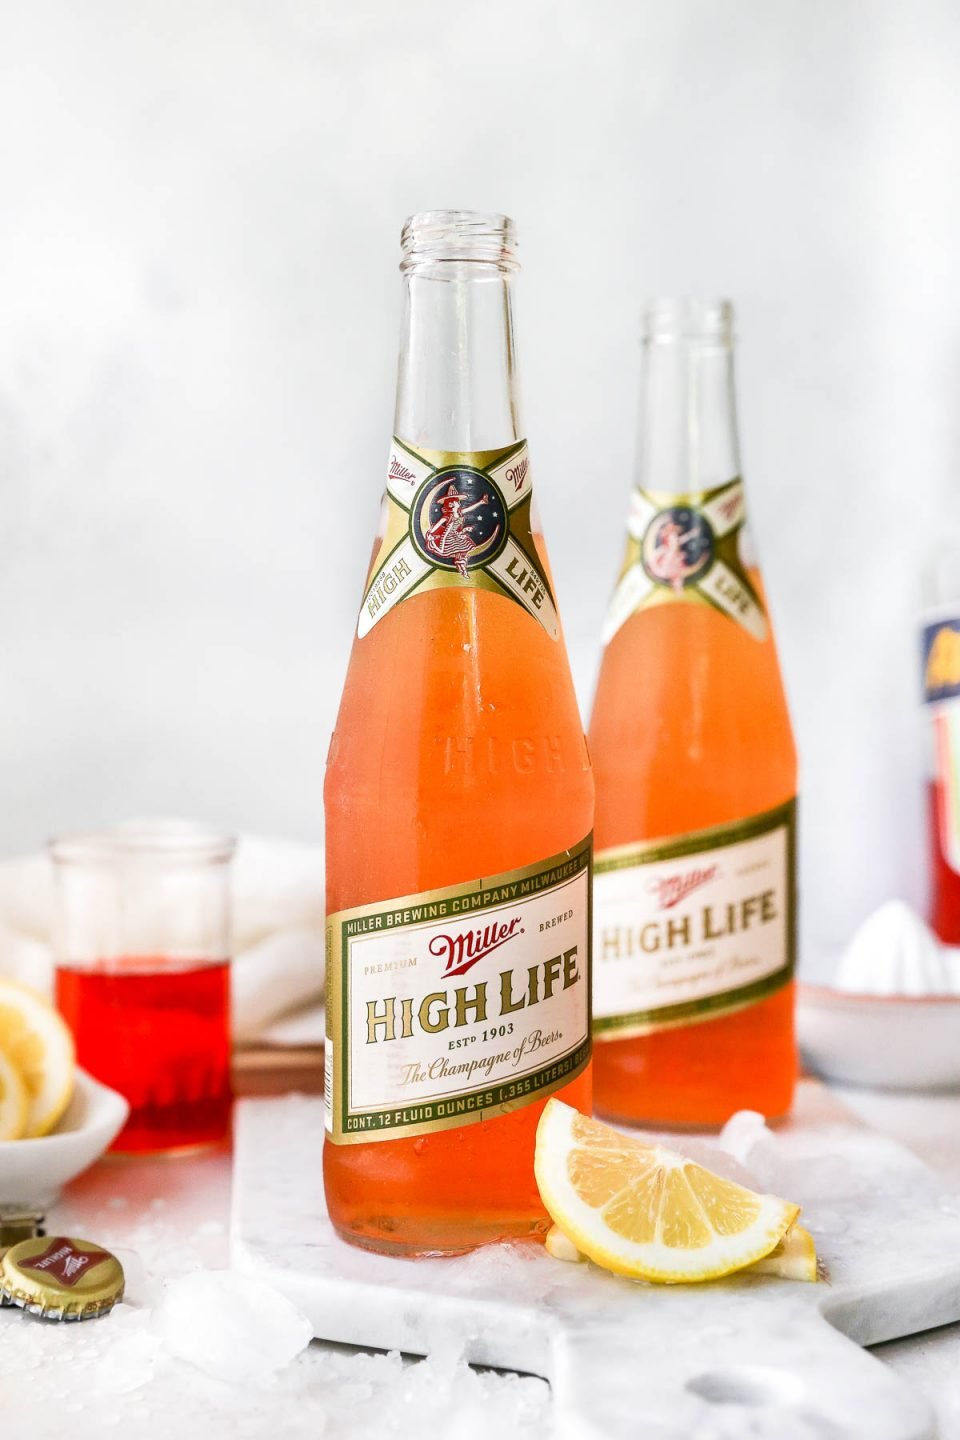 2 Spaghett Cocktails served in Miller High Life bottles. The beer bottles are on a white surface, surrounded by lemon wedges, ice & some Aperol liquor.